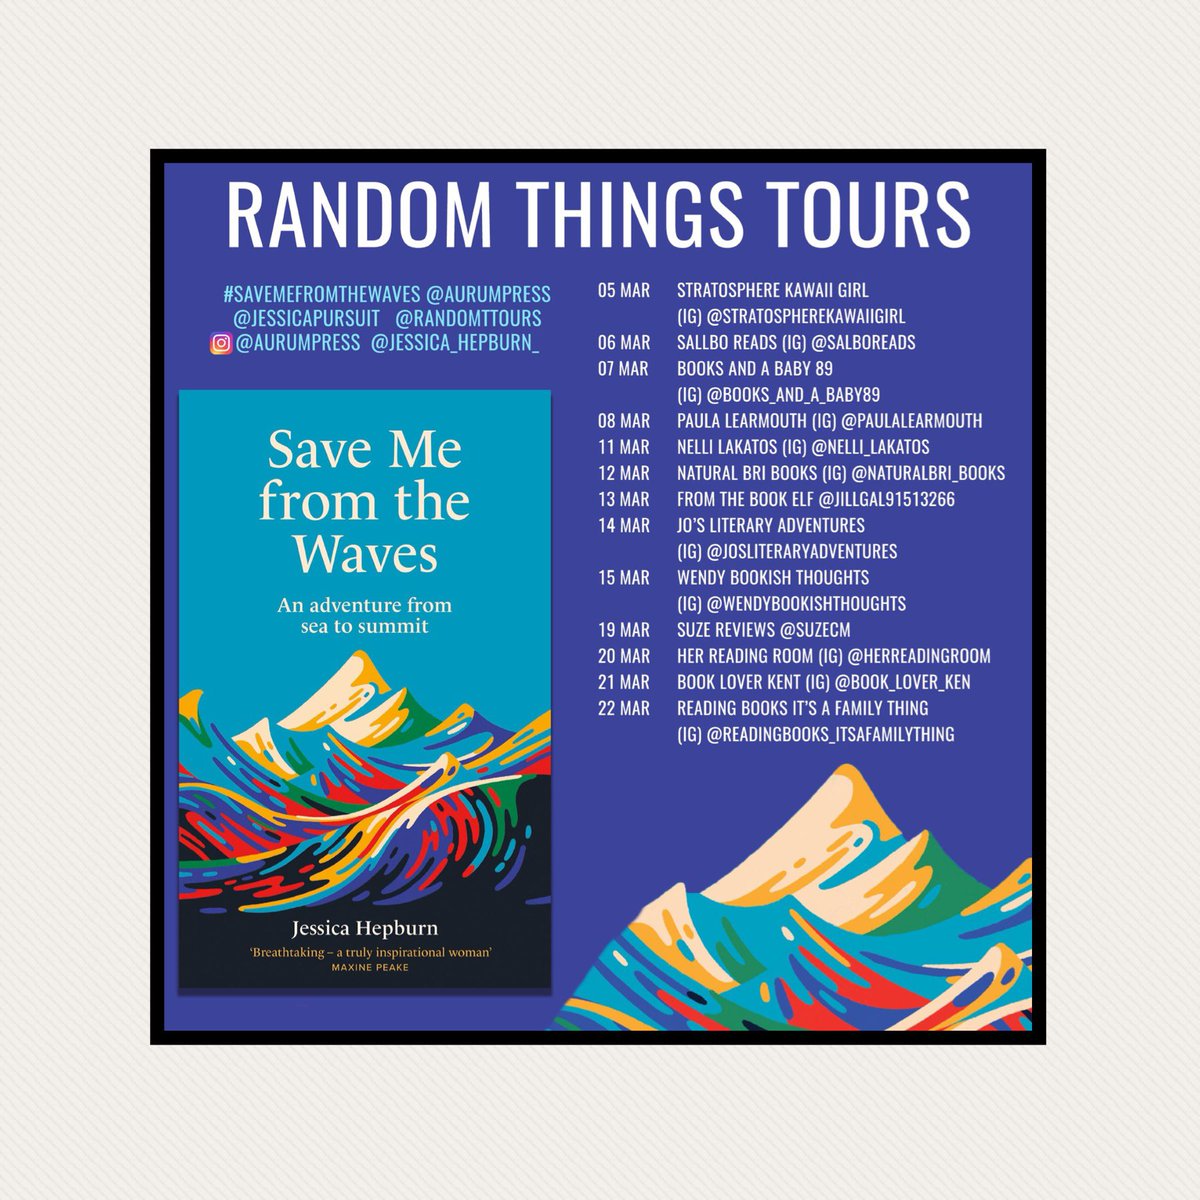 Thanks to @RandomTTours for inviting me on the tour for this one! I mean just look at that cover! 😍😍 Check out my full review over on insta - herreadingroom @JessicaPursuit @aurumpress @annecater #SaveMeFromTheWaves #booktwt #BookTwitter